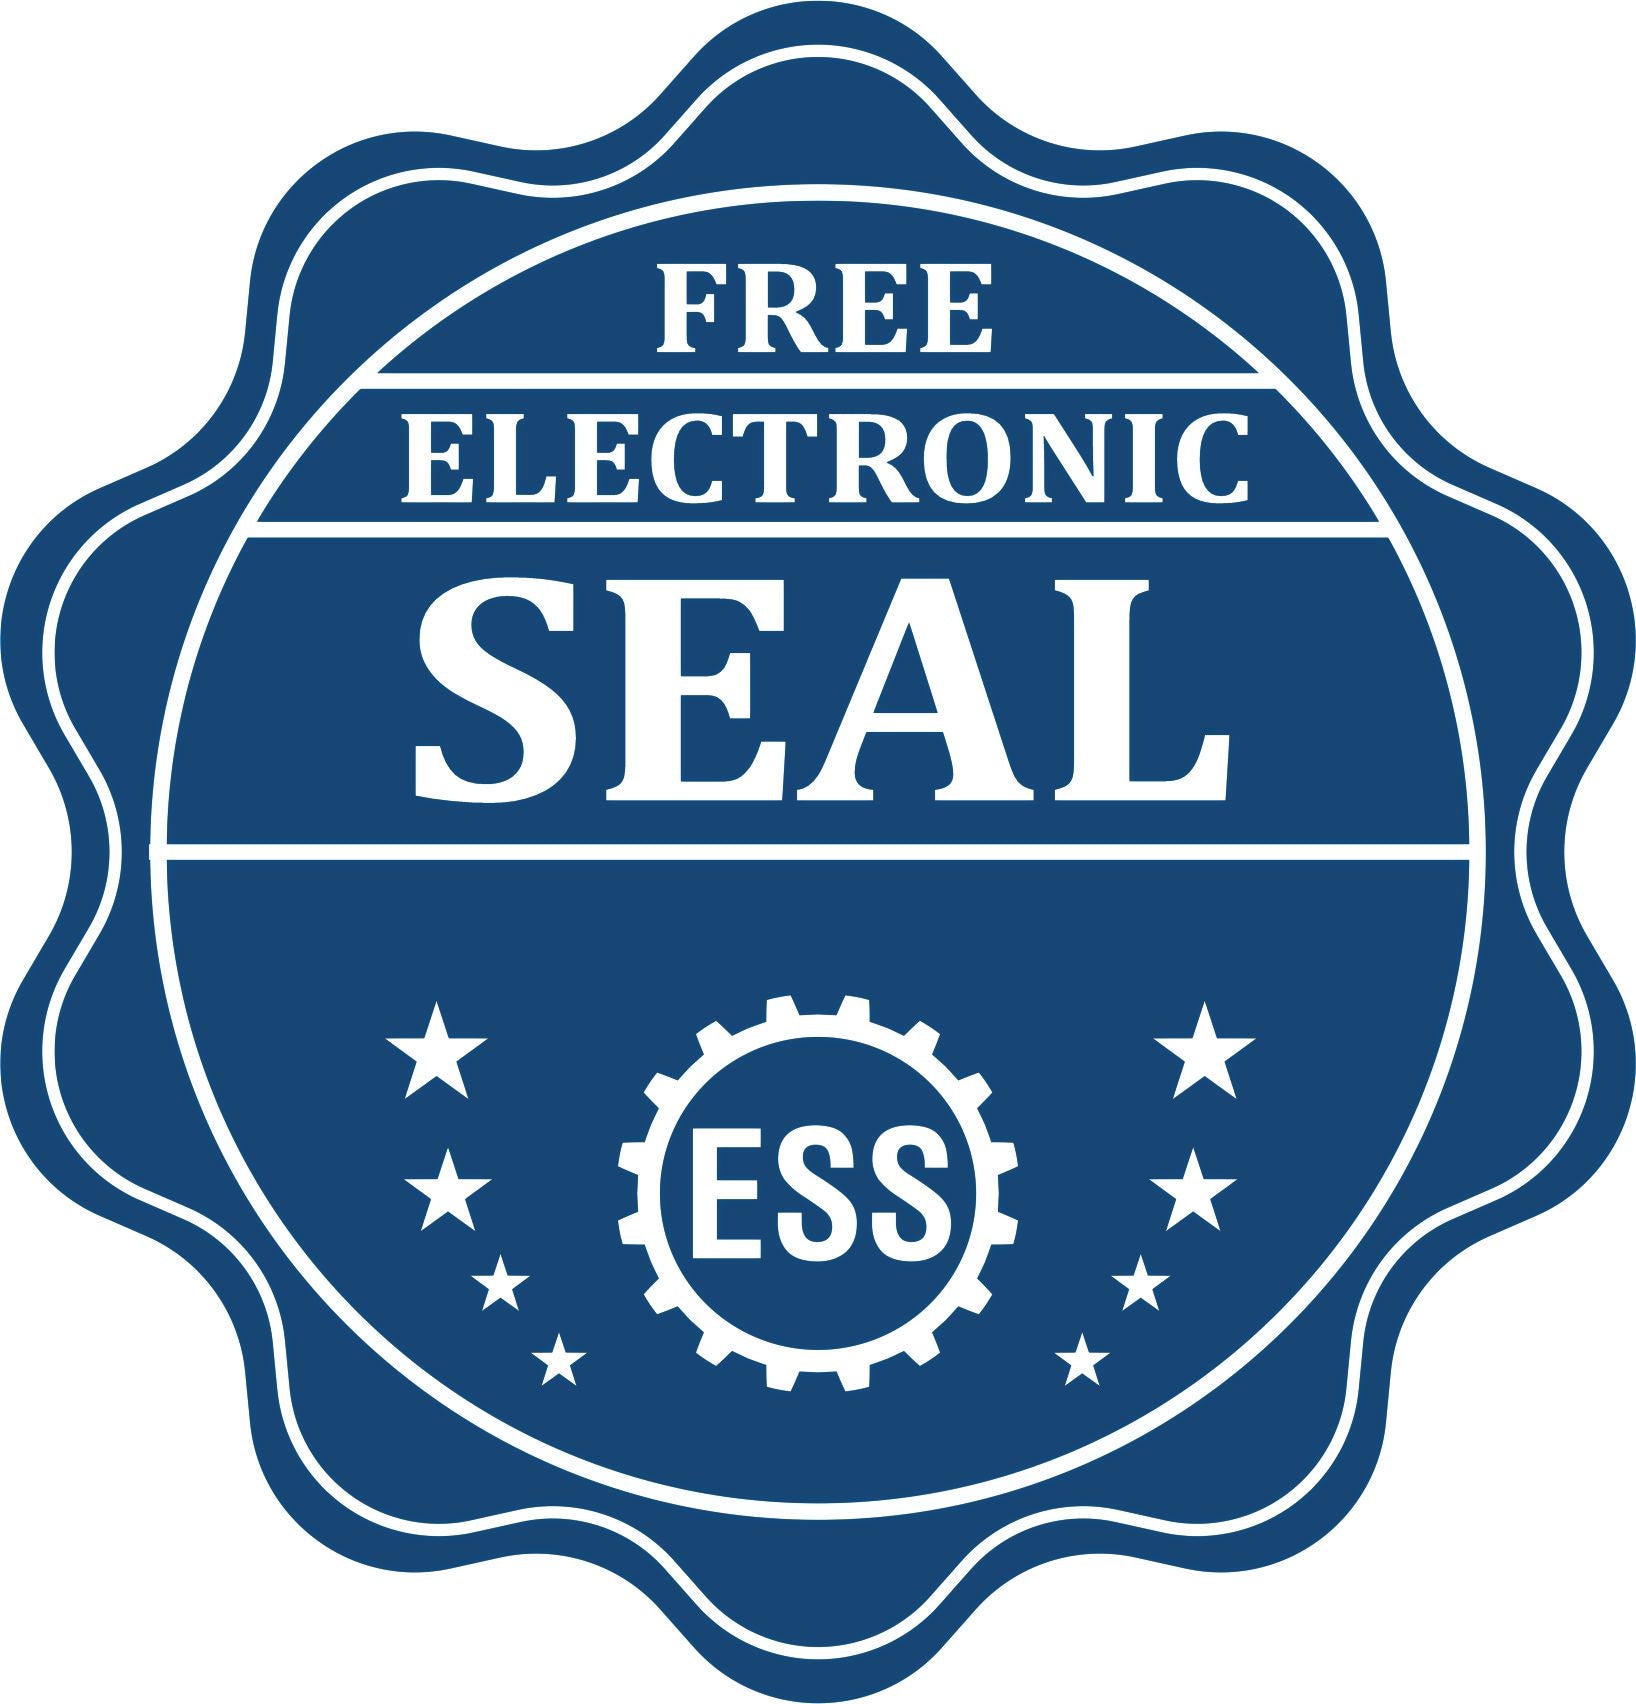 A badge showing a free electronic seal for the Soft Arkansas Professional Geologist Seal with stars and the ESS gear on the emblem.